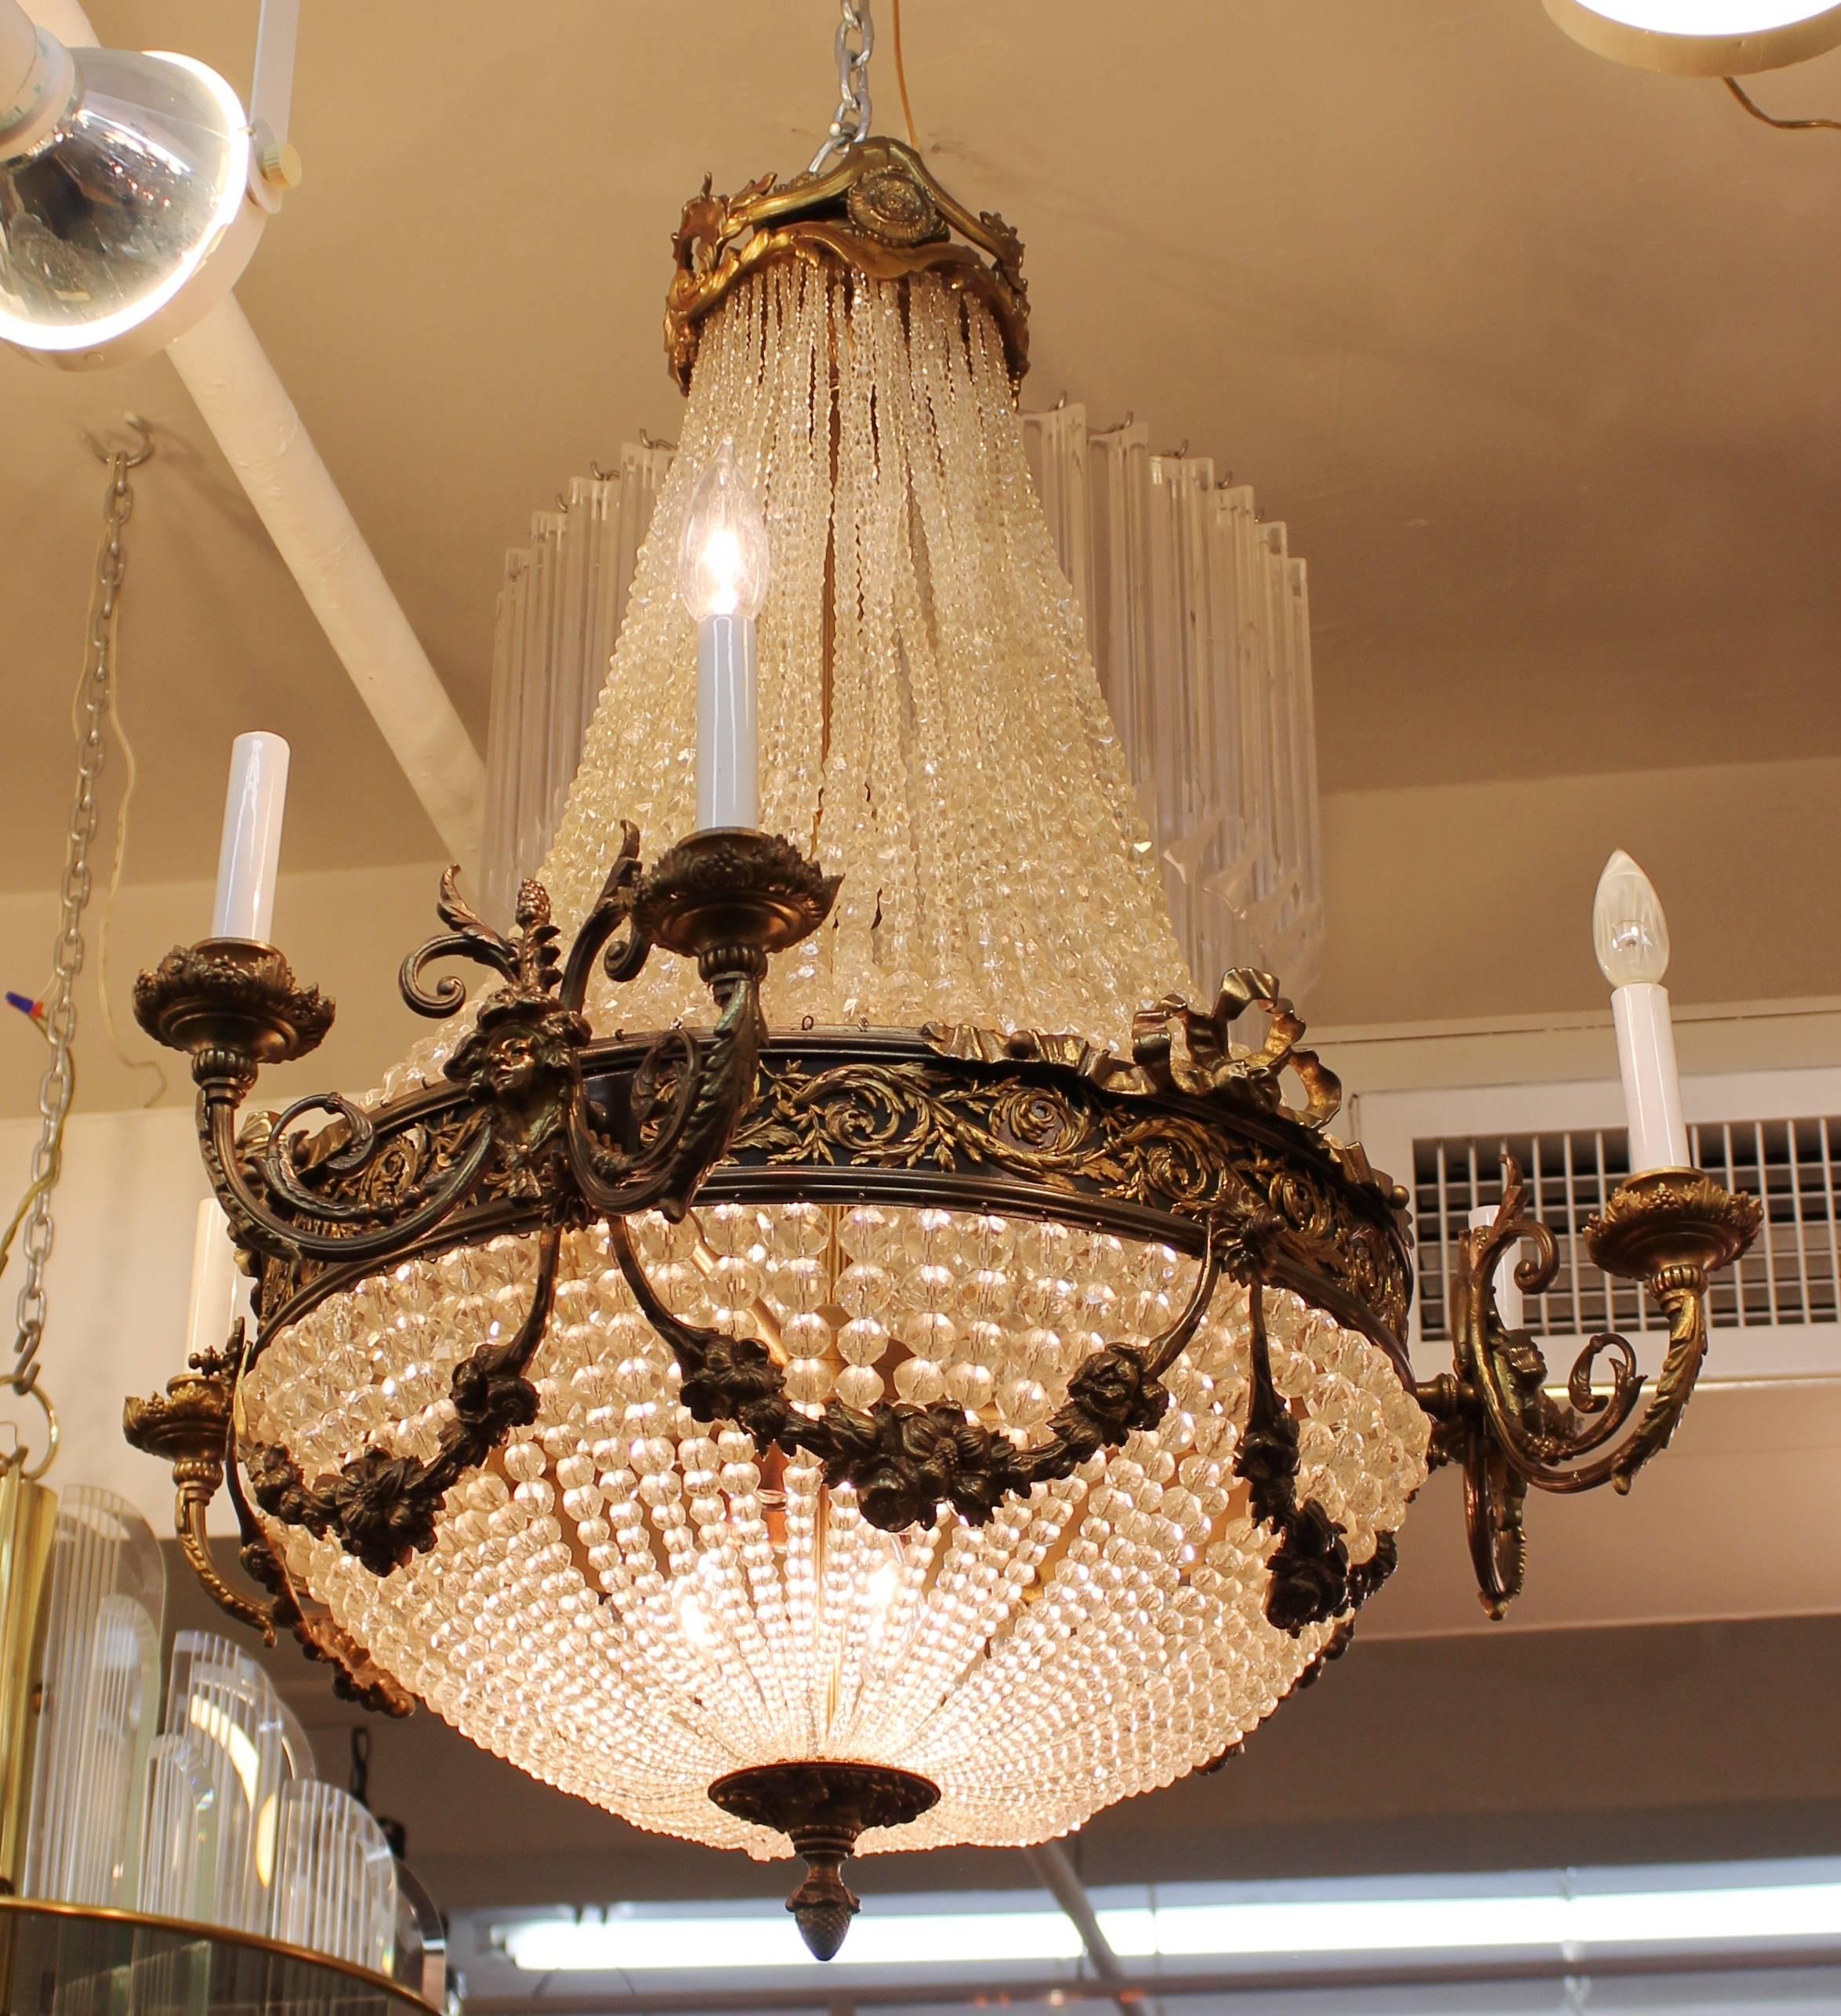 A monumental French neoclassical style chandelier with elaborate bronze decor and cut crystal beads. The sculptural work comprises decorative bronze elements, floral garlands, female allegorical masks and ribbons reminiscent of the style of Louis